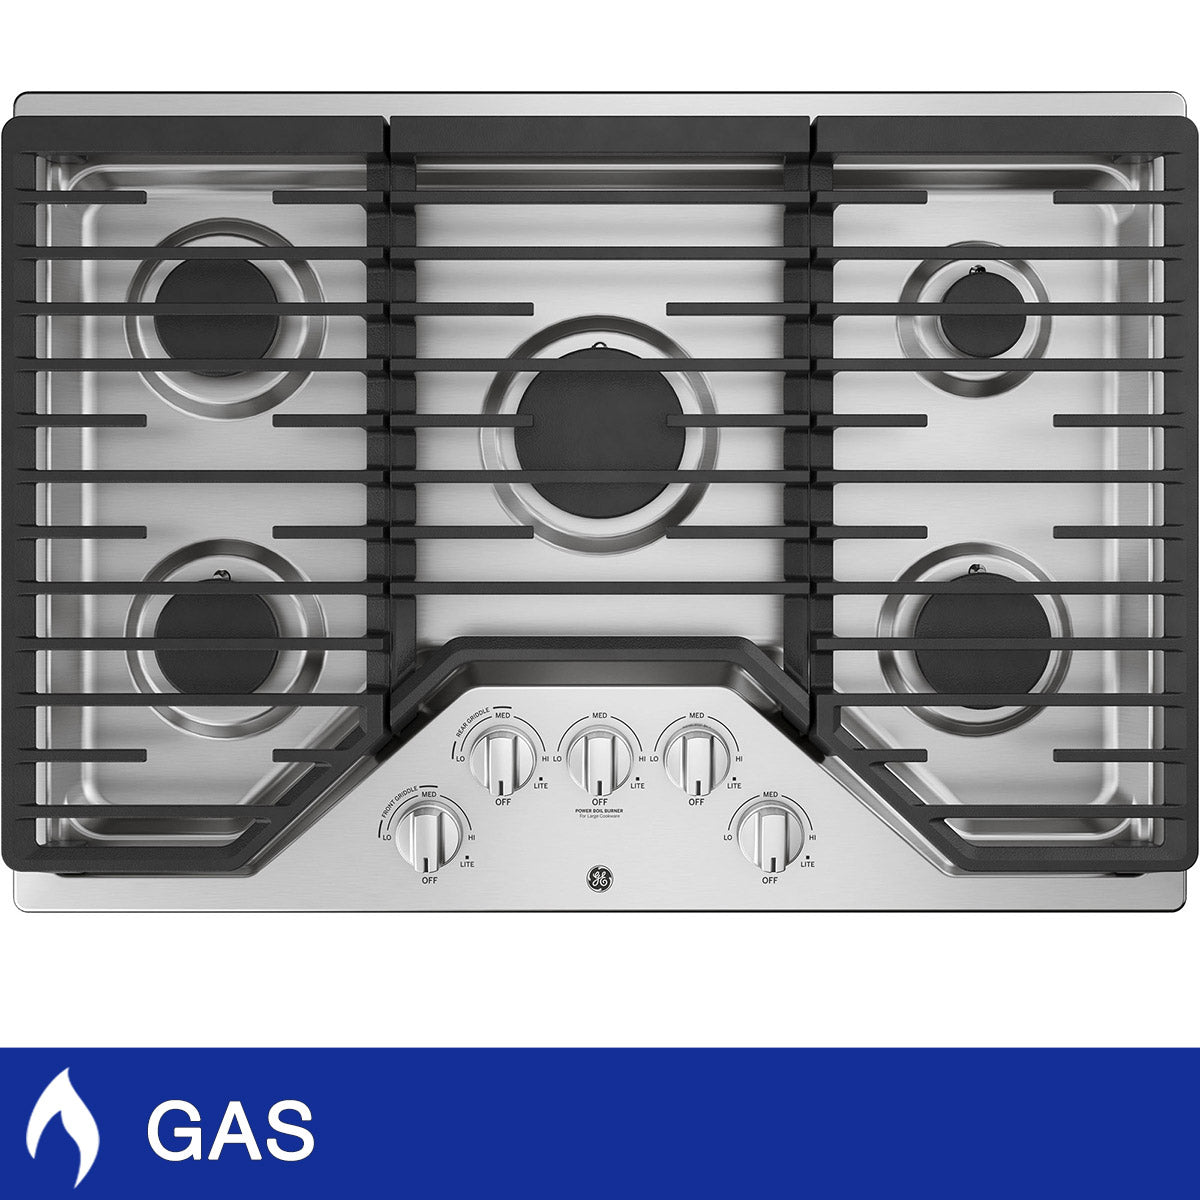 GE 30 Inch. GAS Cooktop with 5 Burners and Power Boil Burner